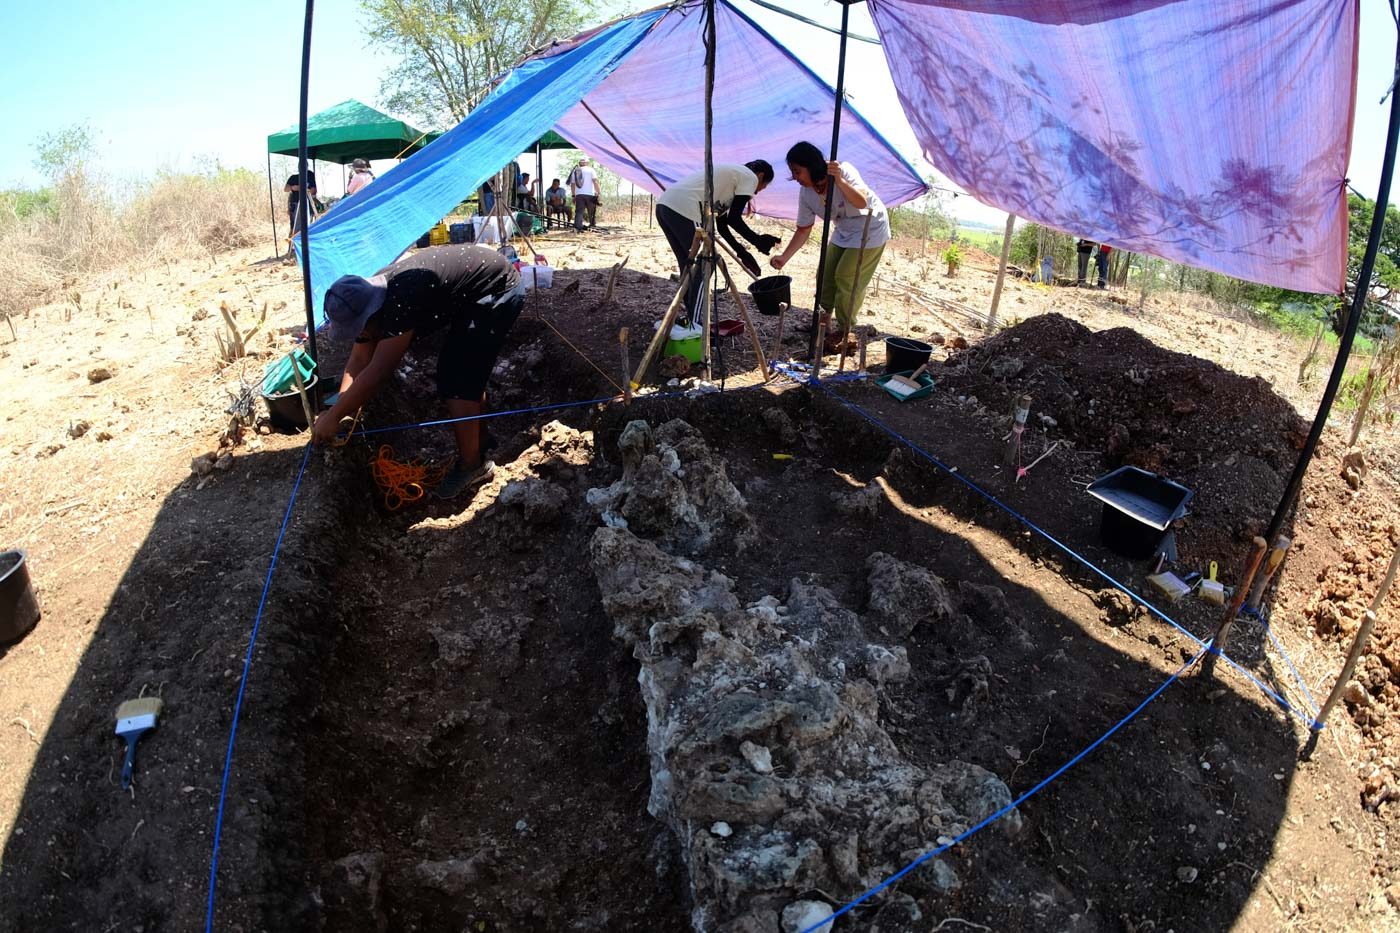 U.P. archaeologists find ancient site in Misamis Oriental dating back to 3,000 BC